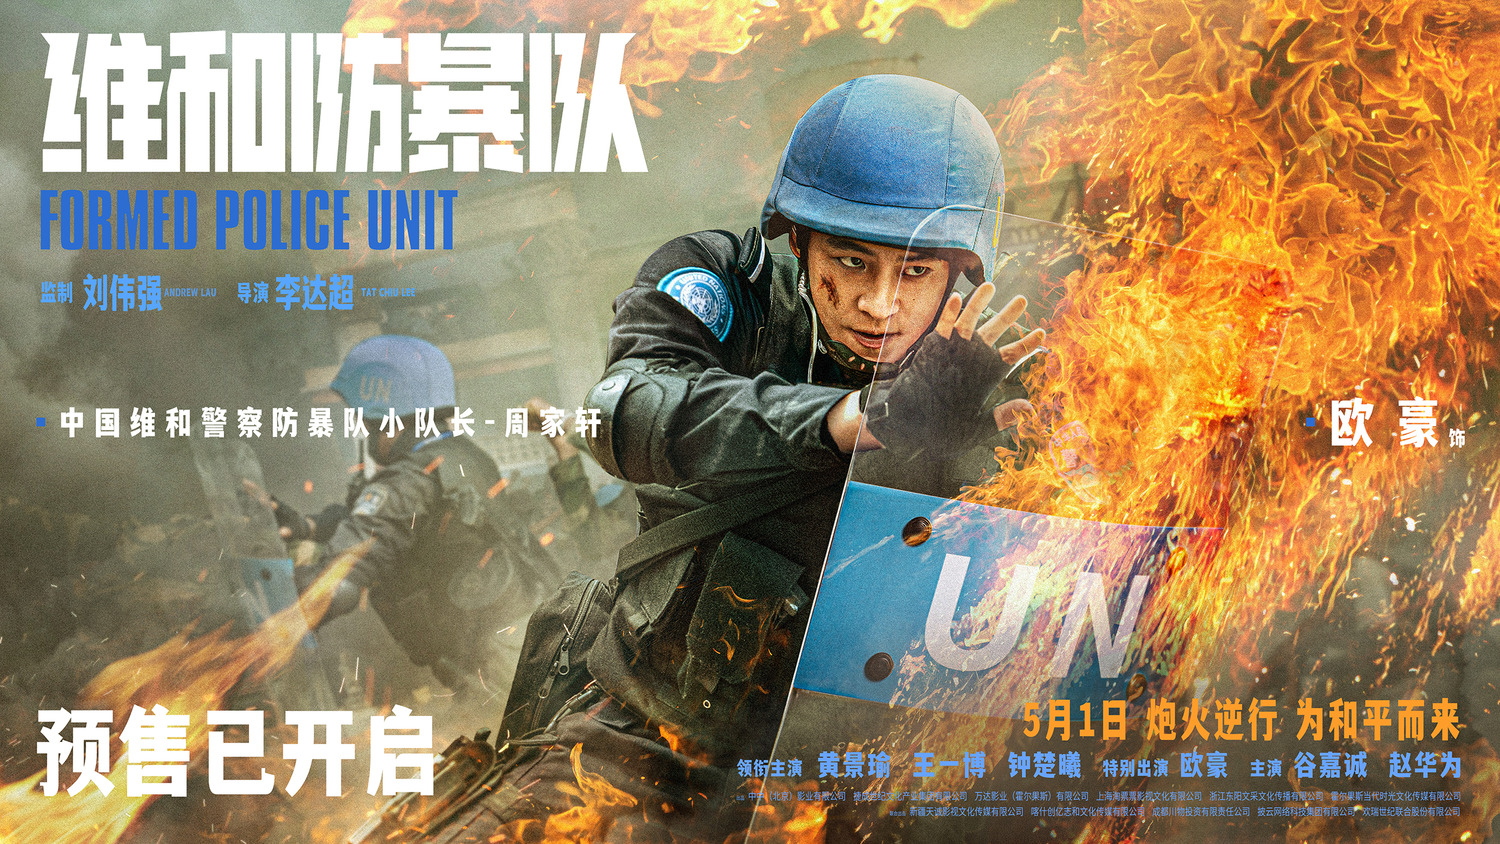 Extra Large Movie Poster Image for Weihe Fangbao Dui (#6 of 6)